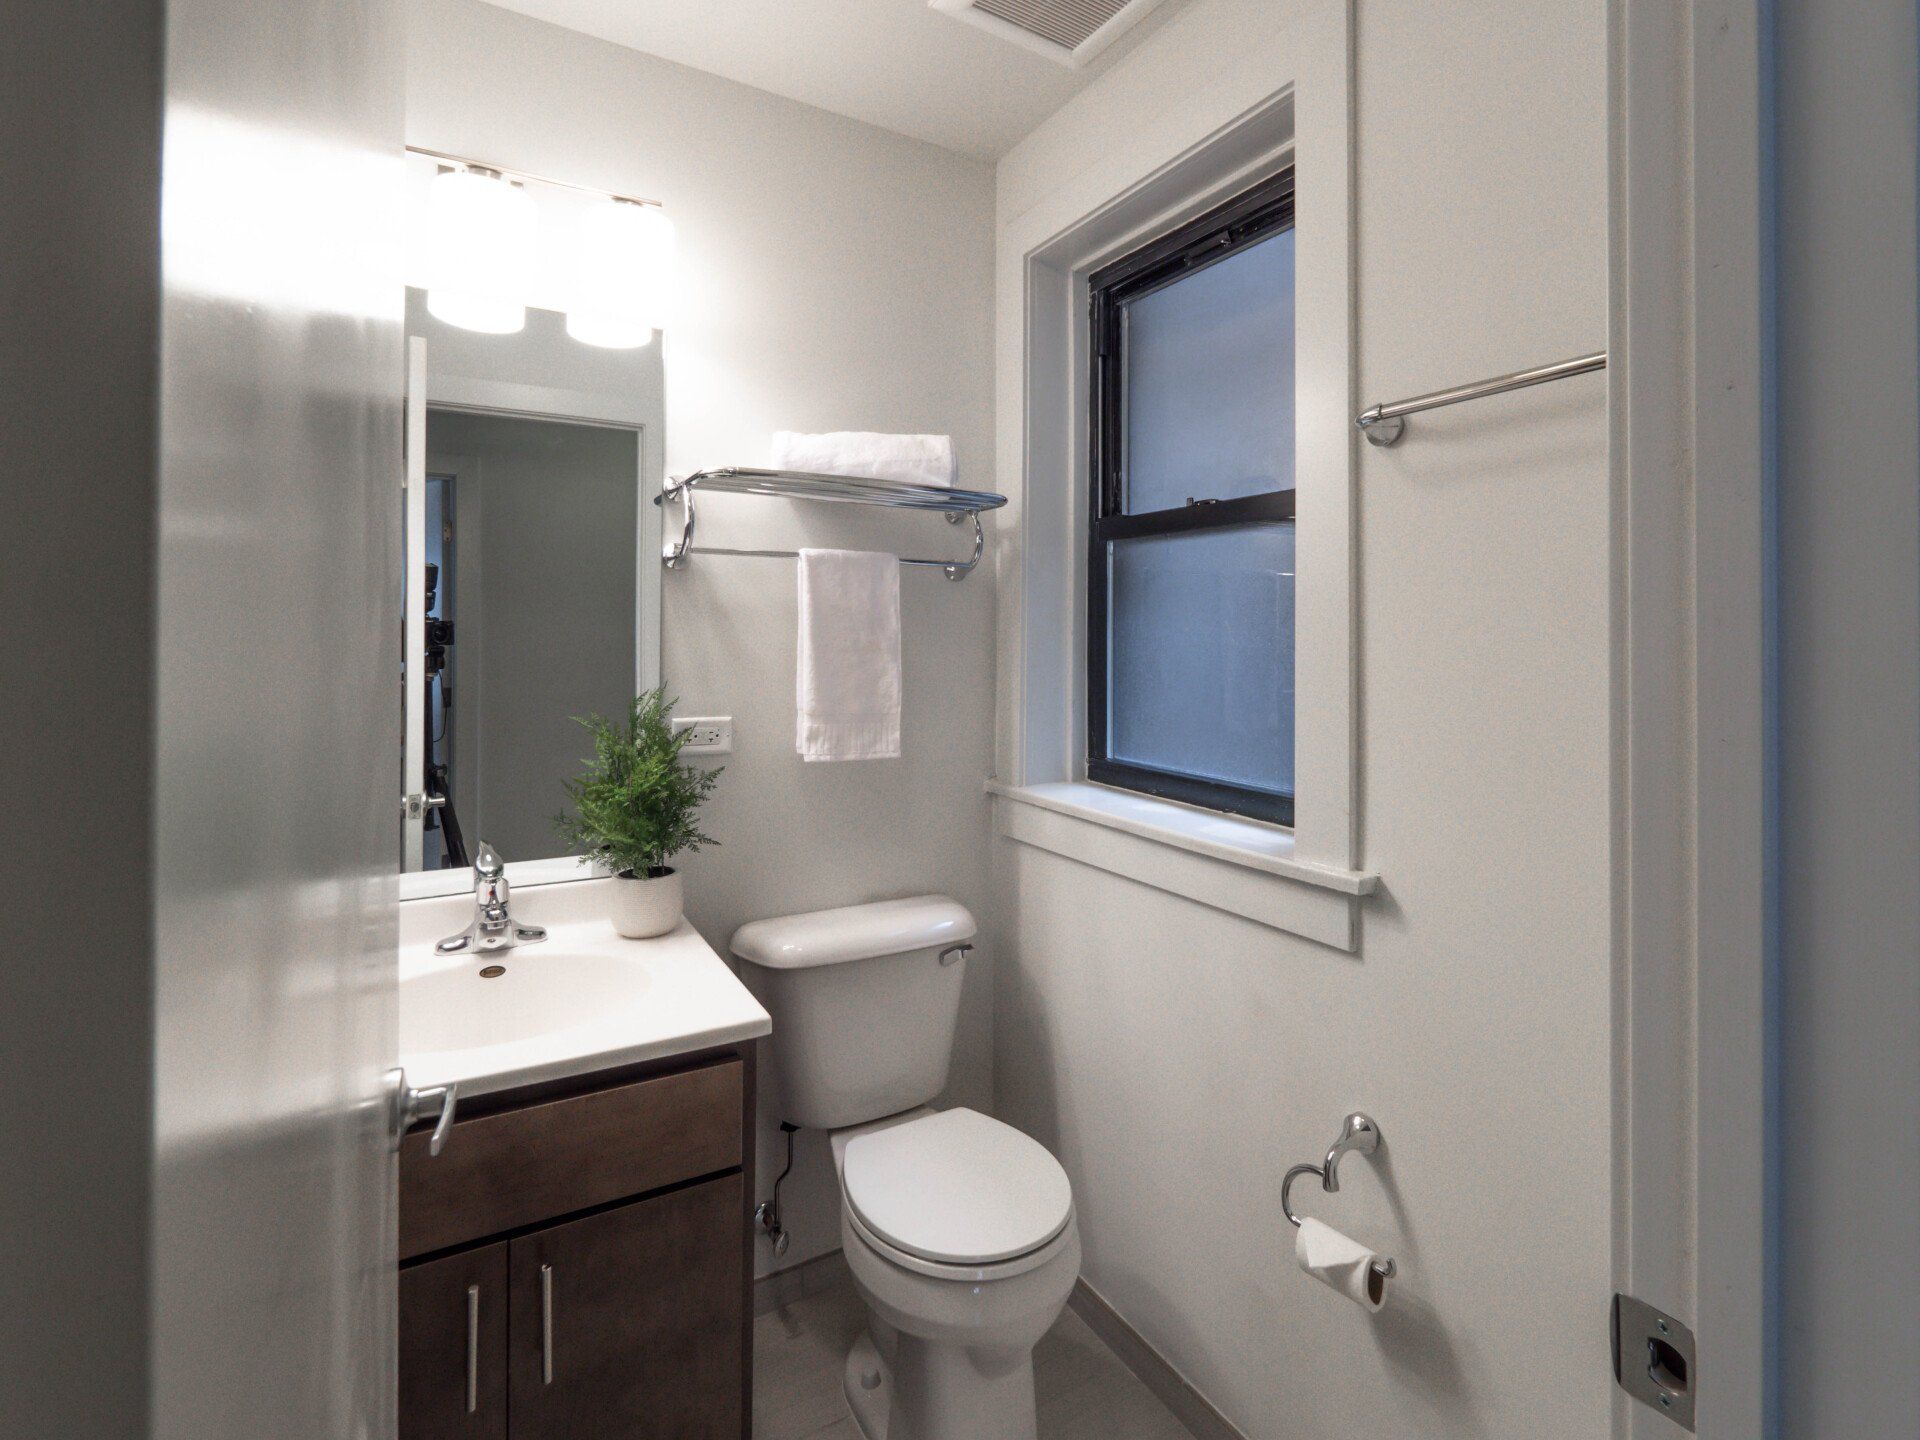 A bathroom with a toilet, sink, mirror, and window at 5425 N Clark Street.